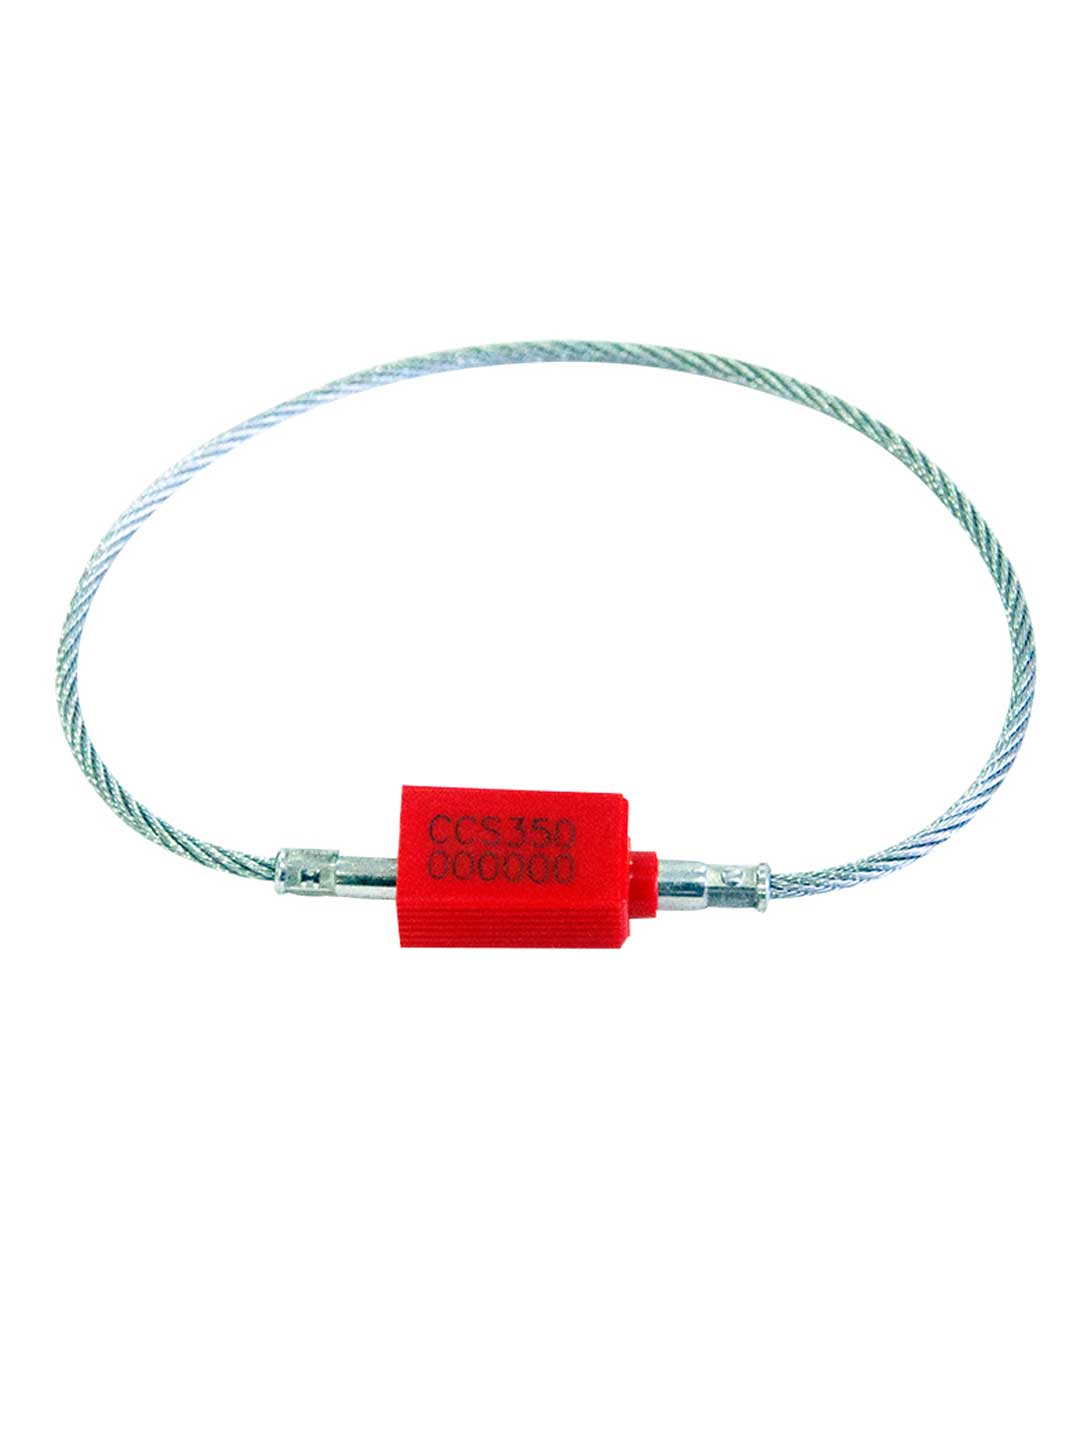 High Security Carrier Cable Seal 350